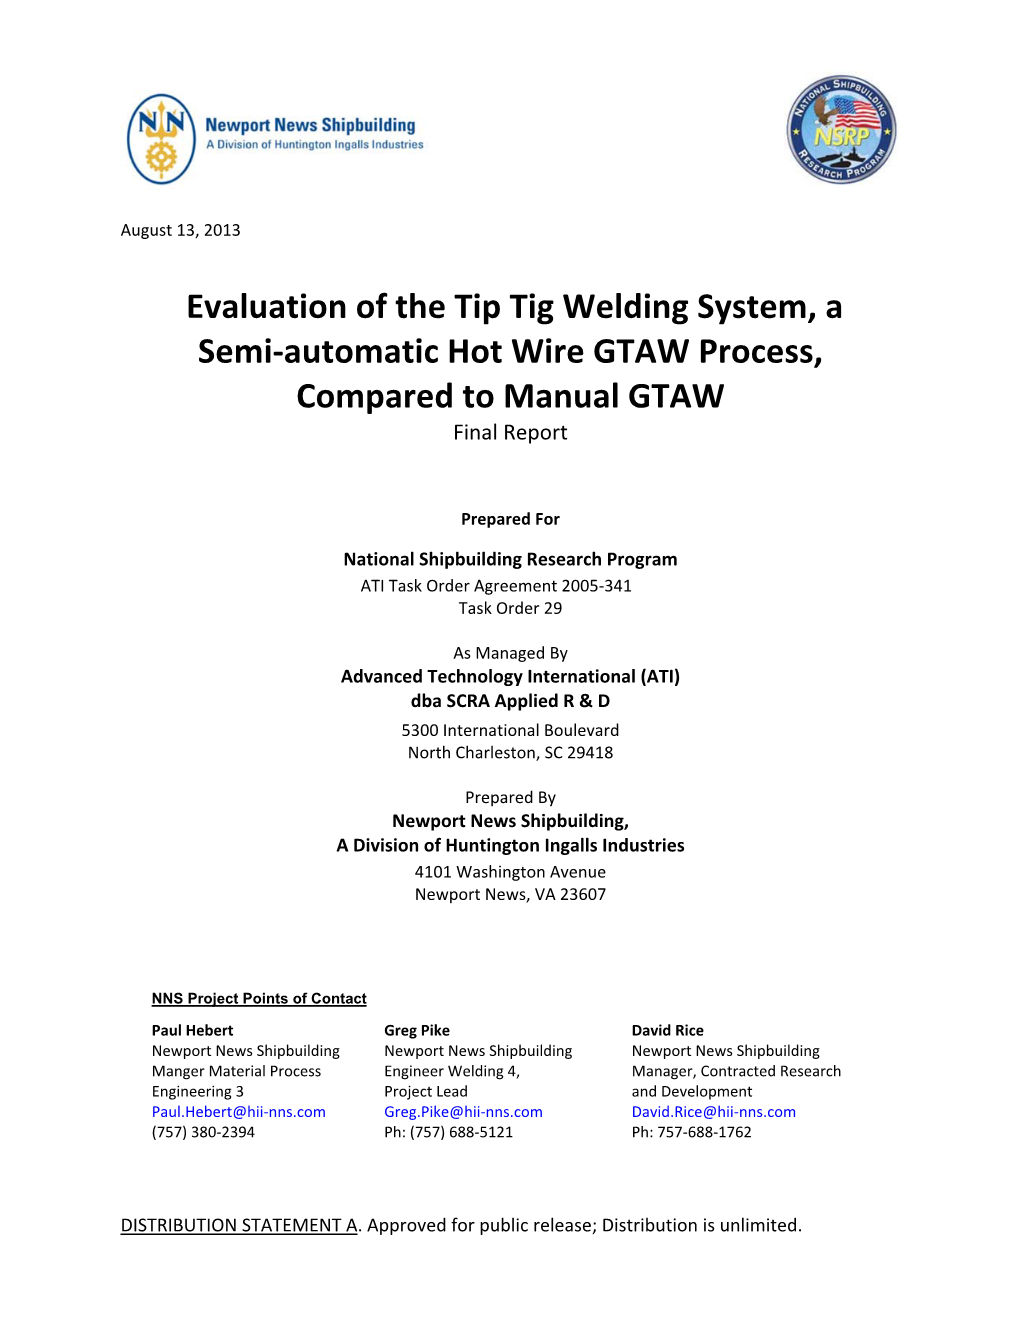 Evaluation of the Tip Tig Welding System, a Semi-Automatic Hot Wire GTAW Process, Compared to Manual GTAW SECURITY CLASSIFICATION NO